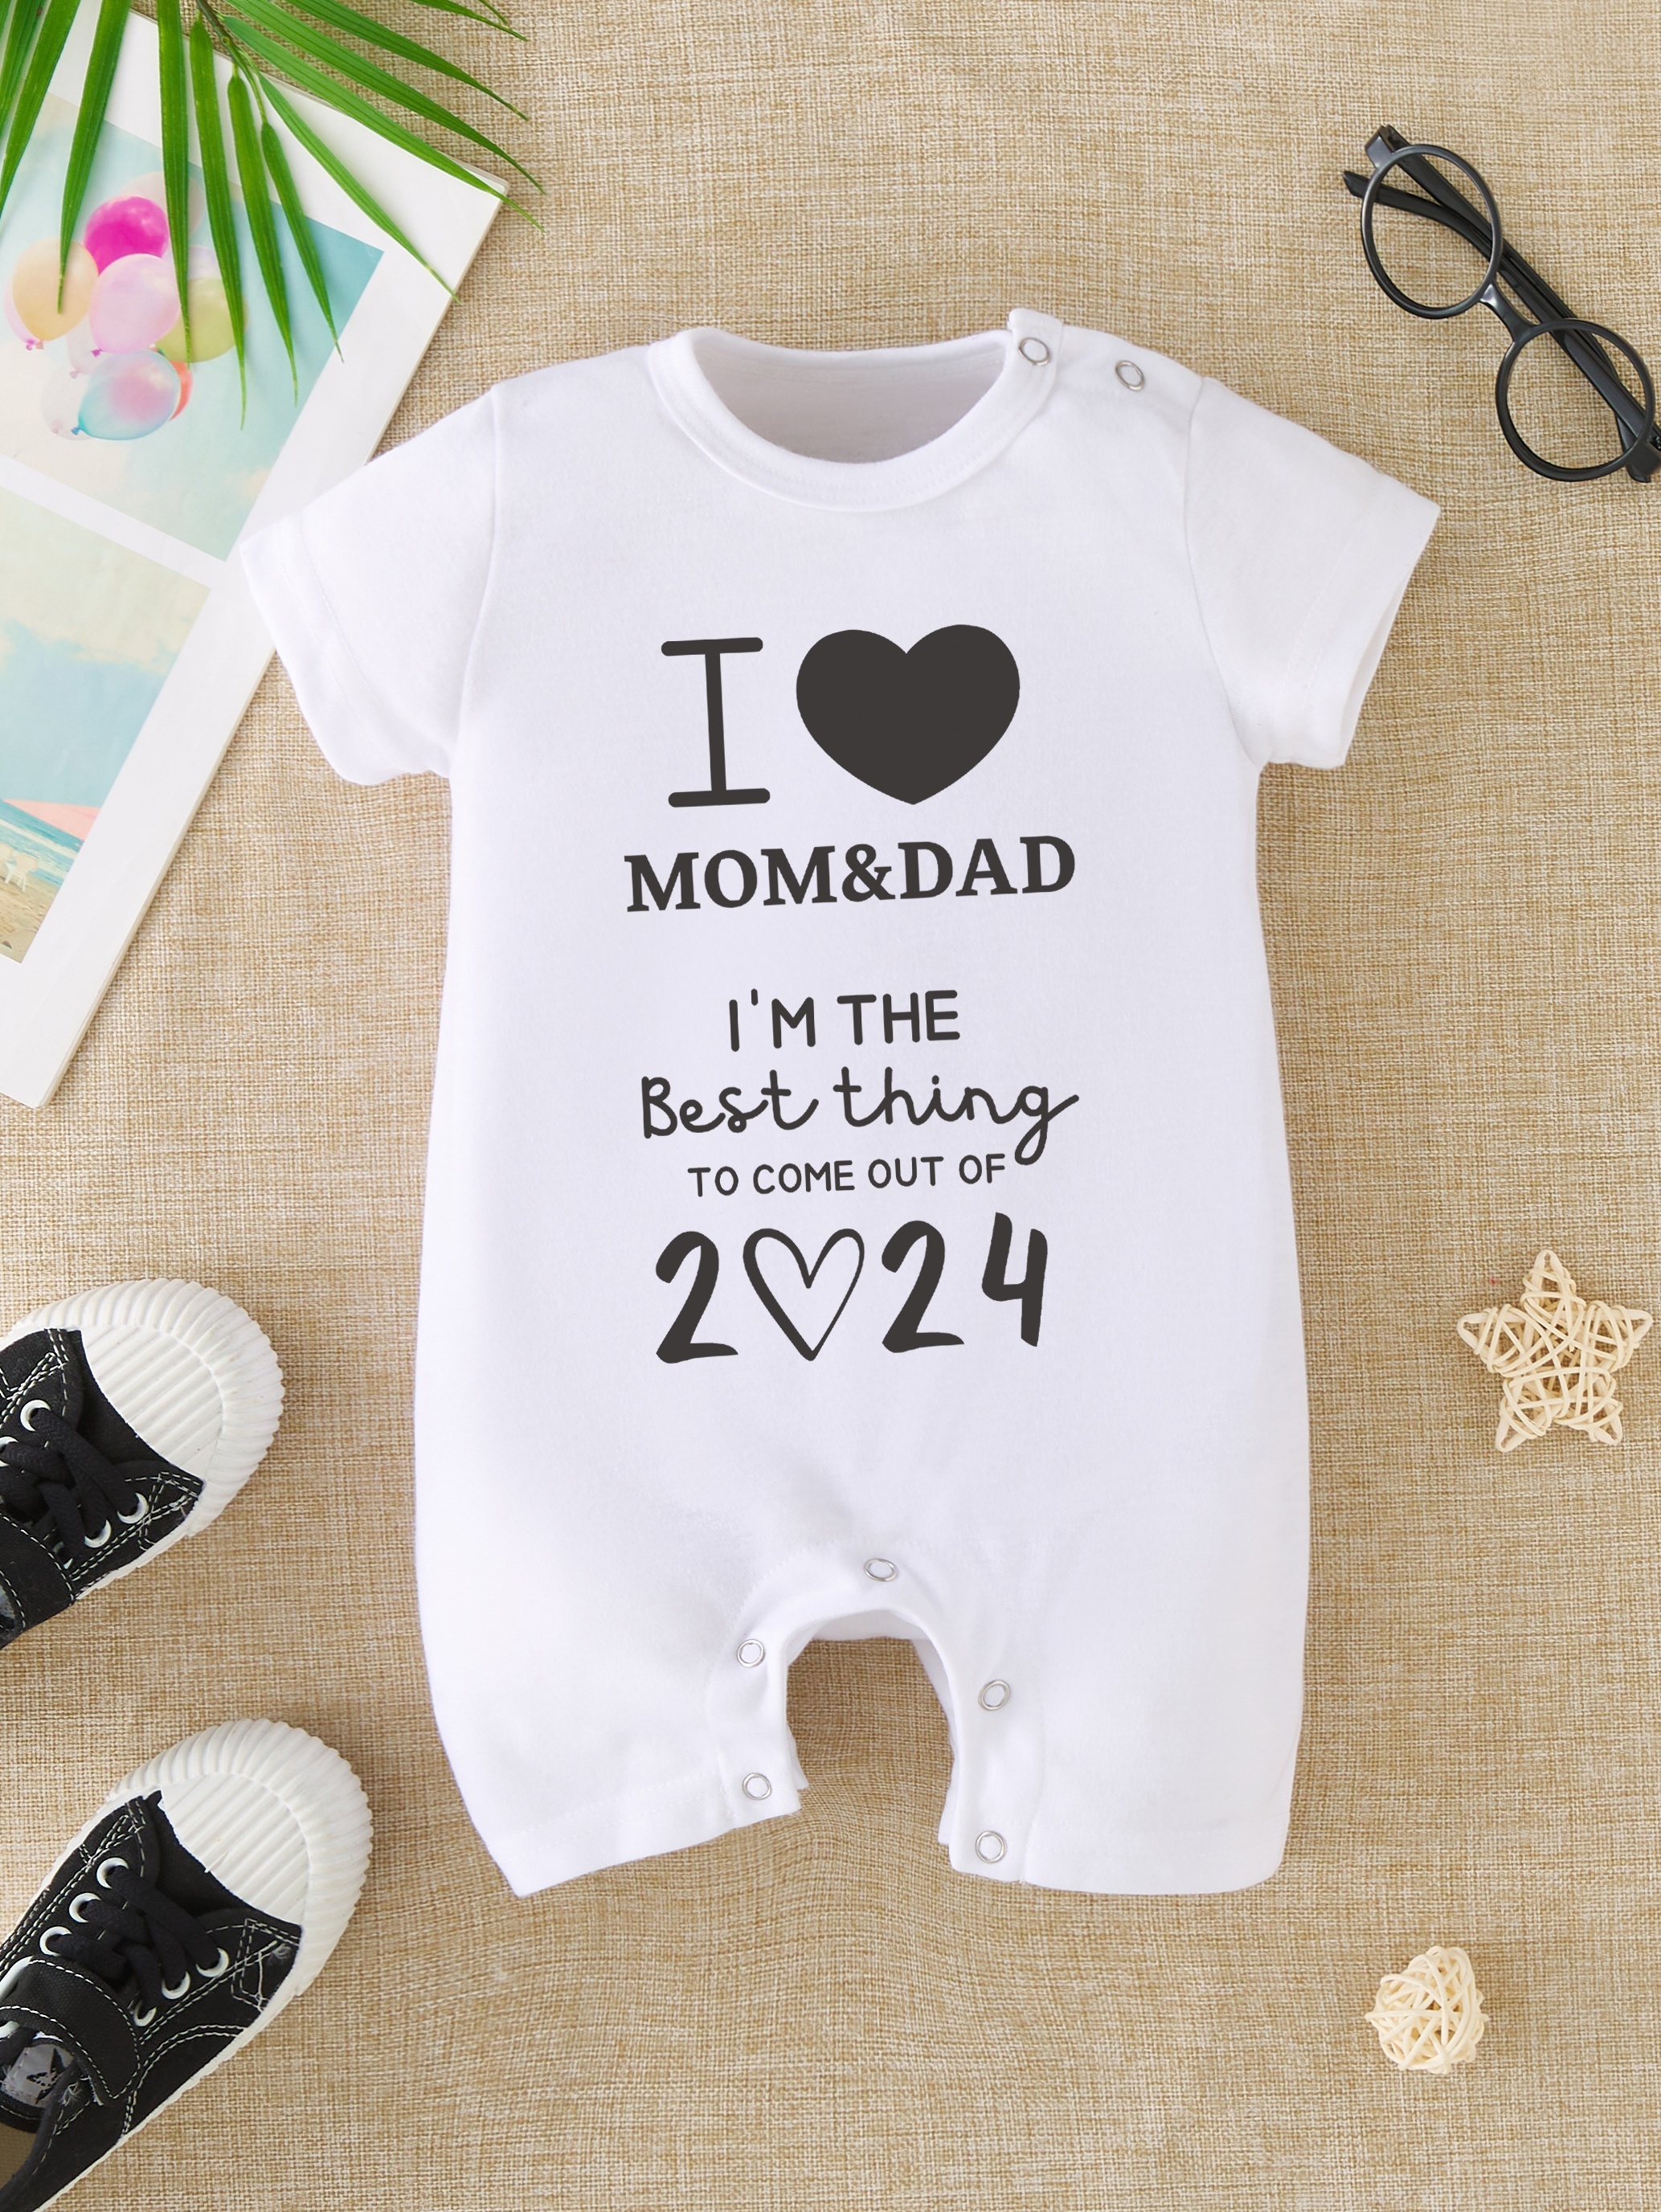 The 70 Best Gifts for Moms of 2024